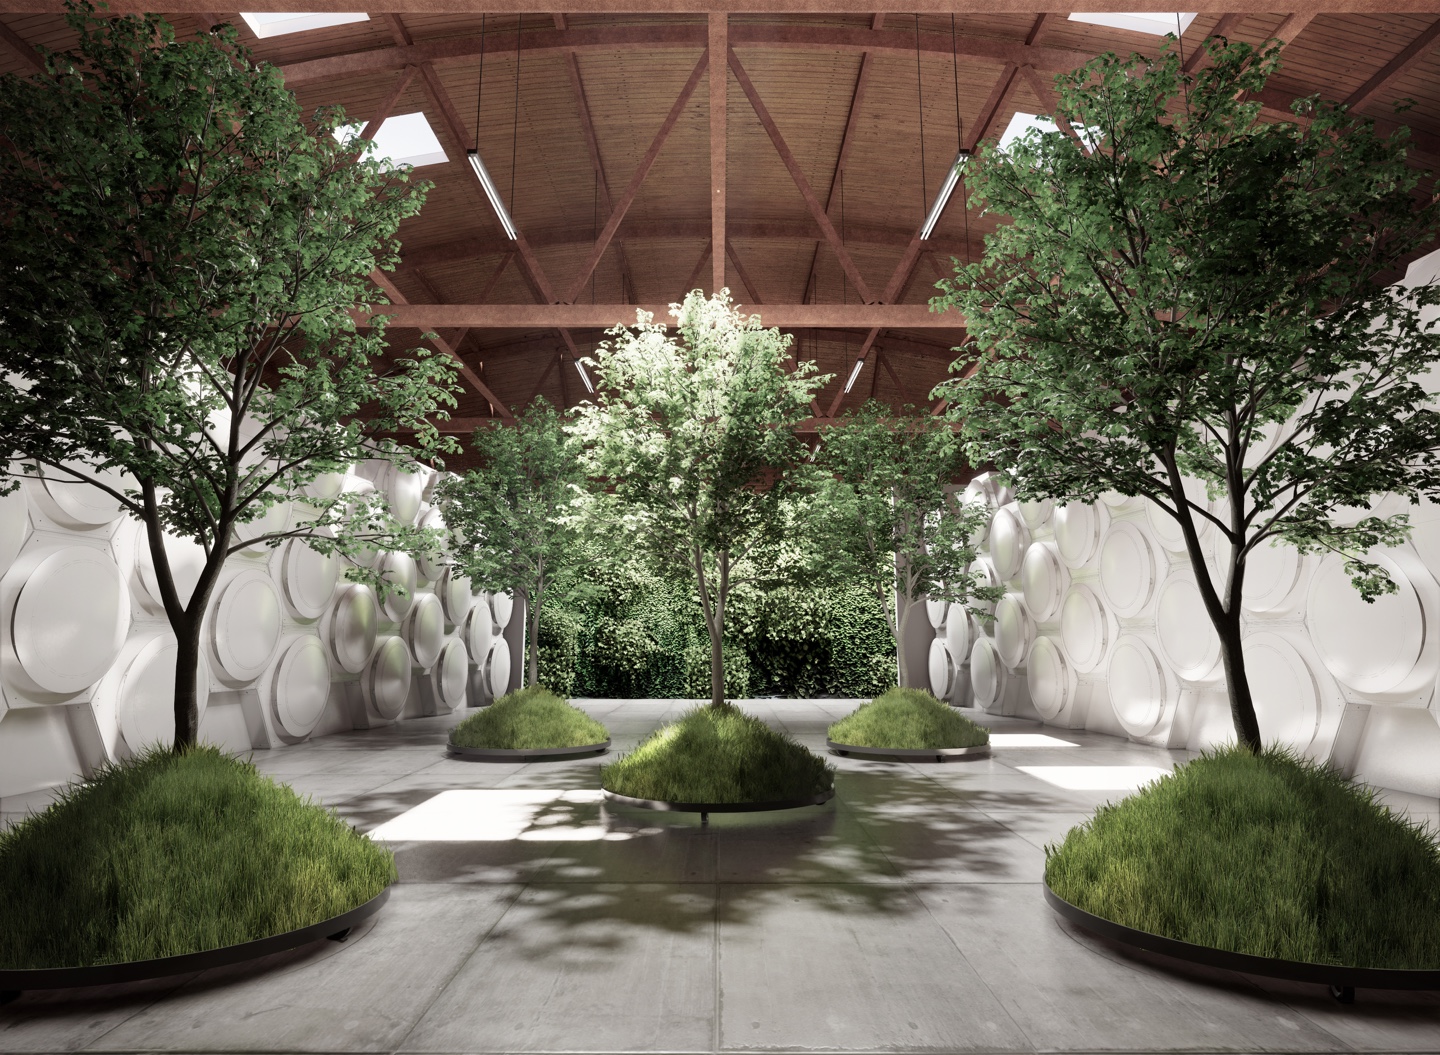 A rendering of a room consisting of concrete floors, an arched wooden ceiling, hexagonal patterned walls and five trees planted on mounds.